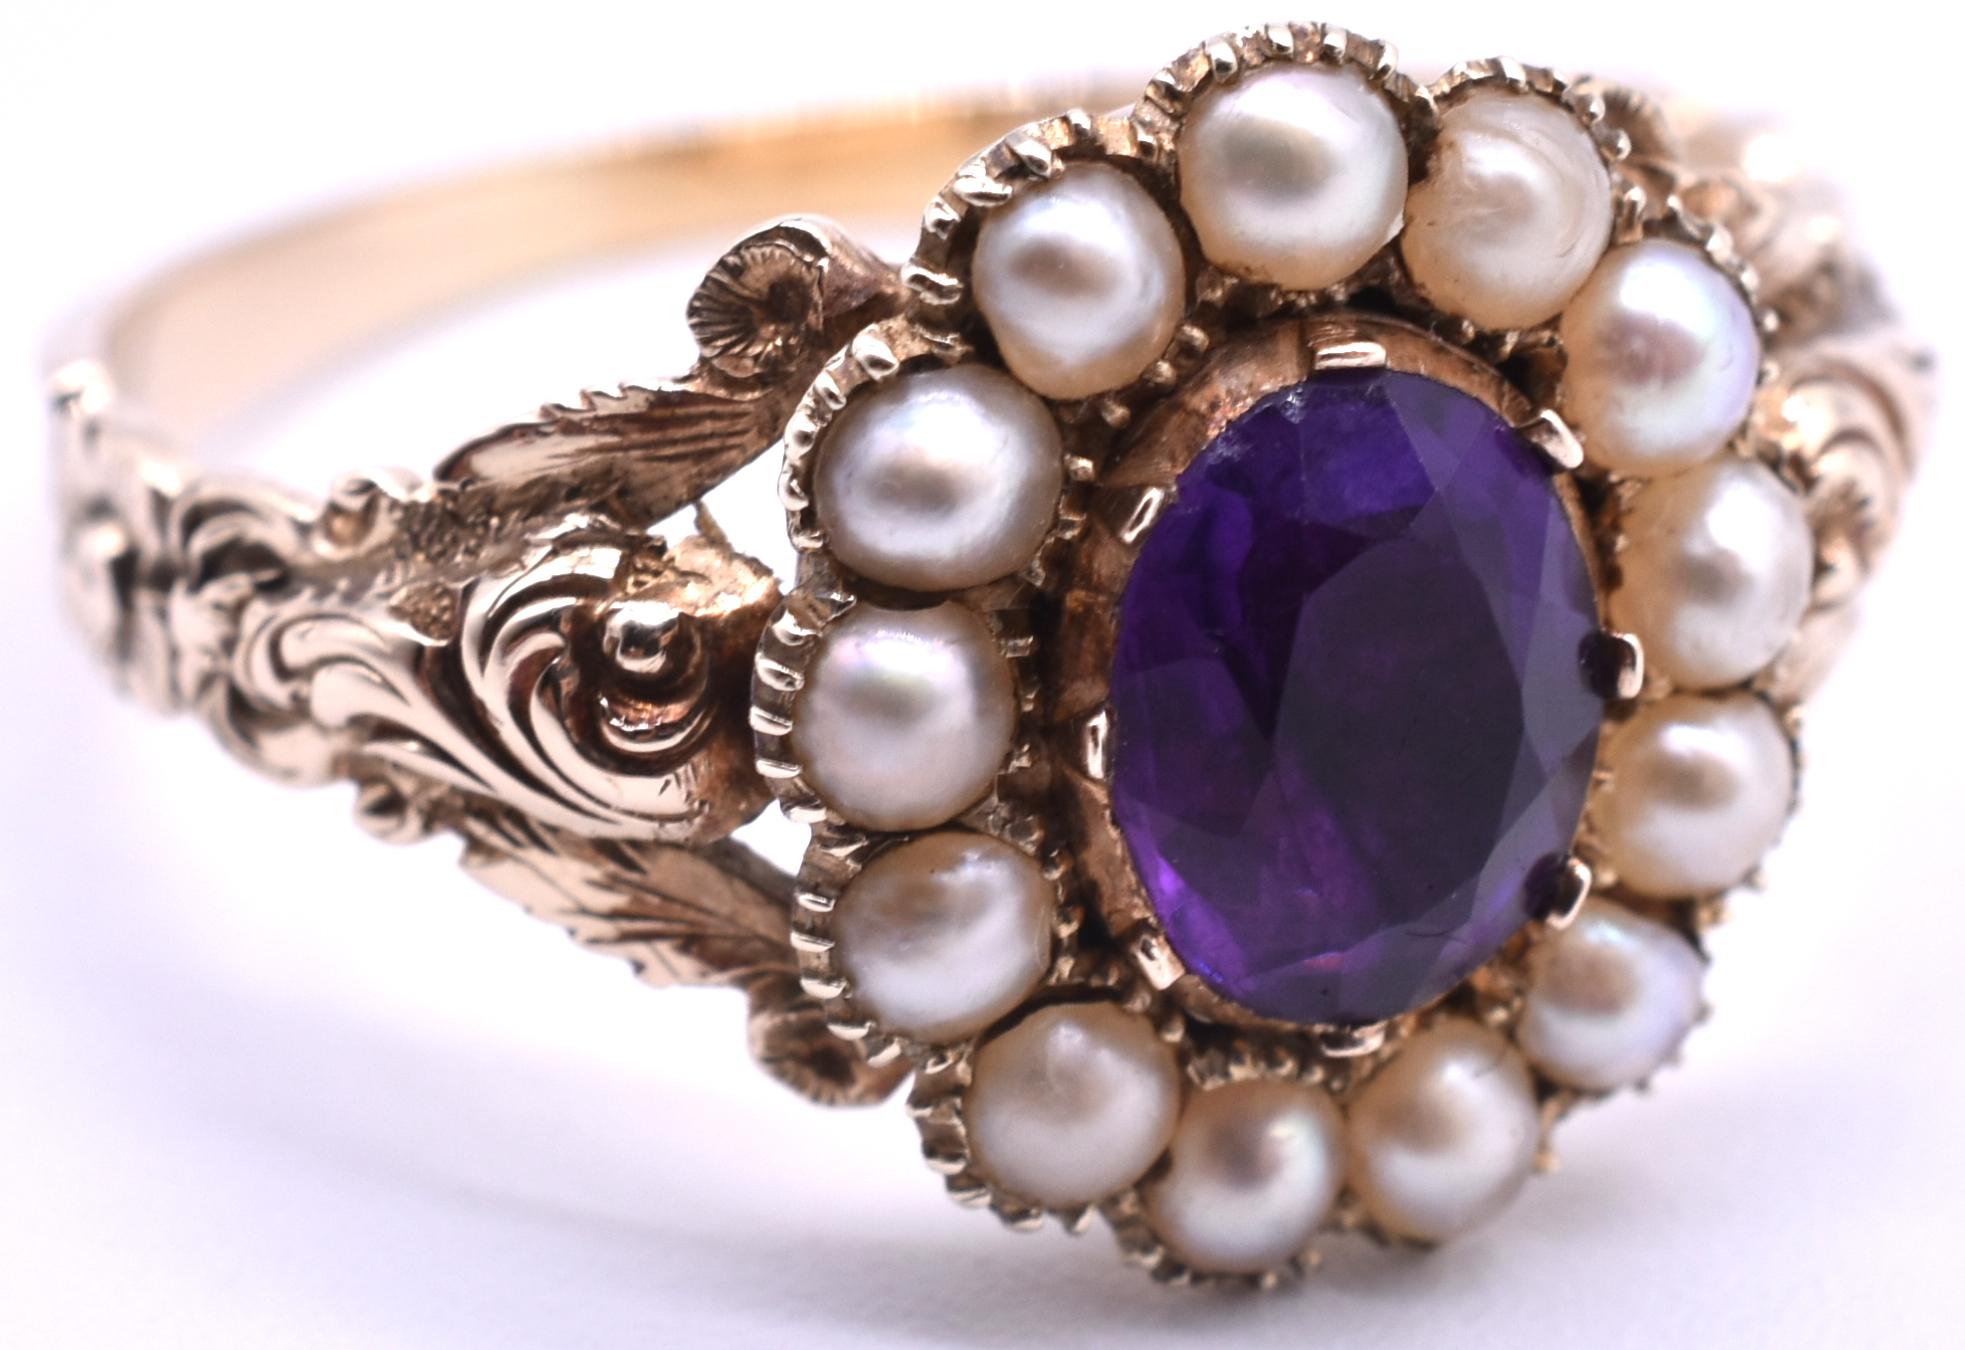 15k amethyst and seed pearl cluster ring with thirteen seed pearls bordering a beautiful amethyst oval stone. Repousse whorls adorn the shoulders and terminate in a small gold flower form. The setting is a foiled, closed back, 1850. The ring is US